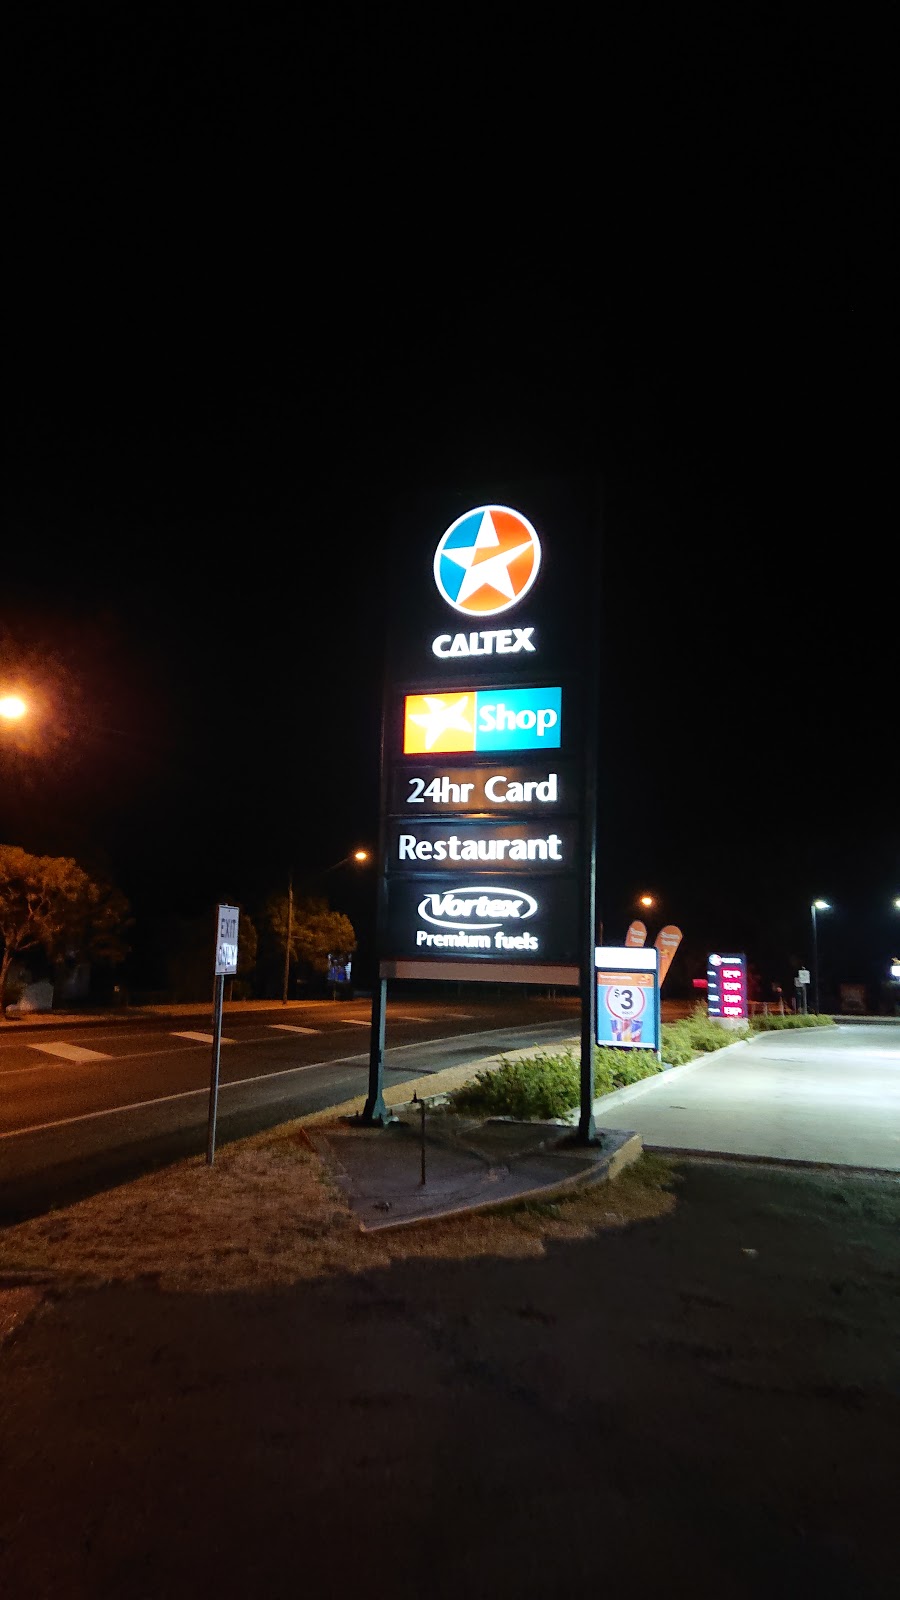 Caltex Miles | gas station | 1-3 Tully St Cnr Murilla St, Miles QLD 4415, Australia | 0746272809 OR +61 7 4627 2809